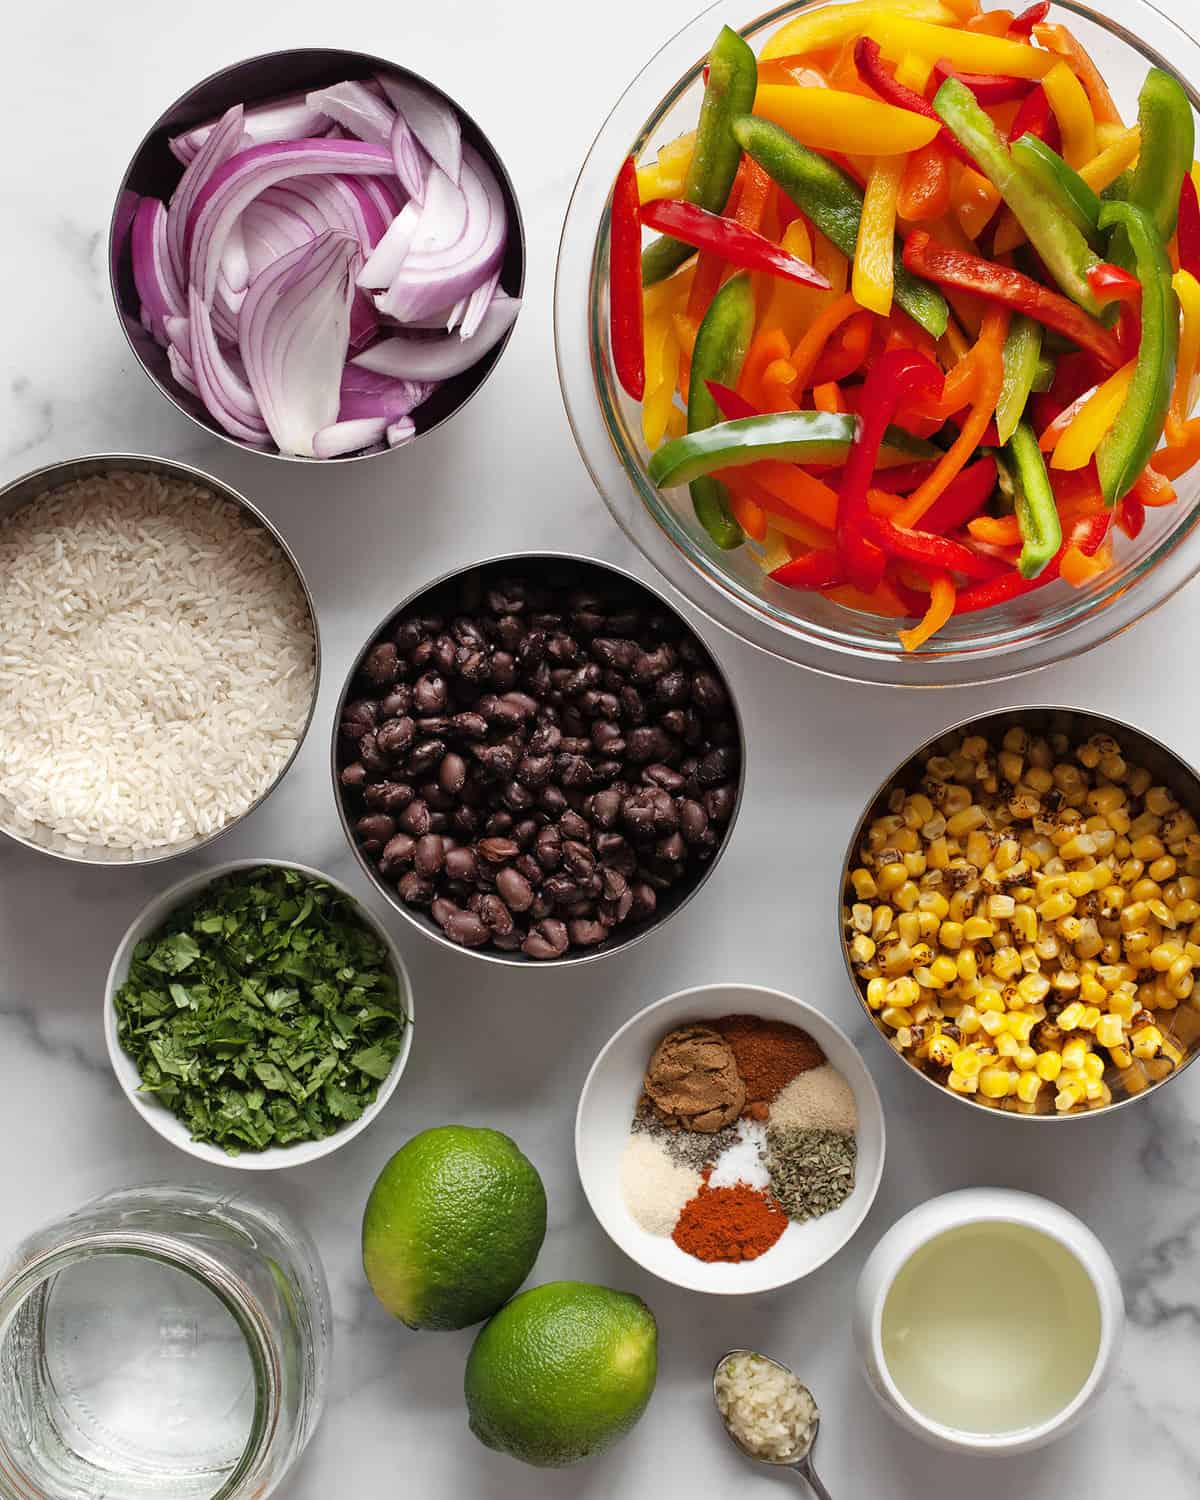 Ingredients including peppers, onions, bans, corn, rice, lime, oil and spices.